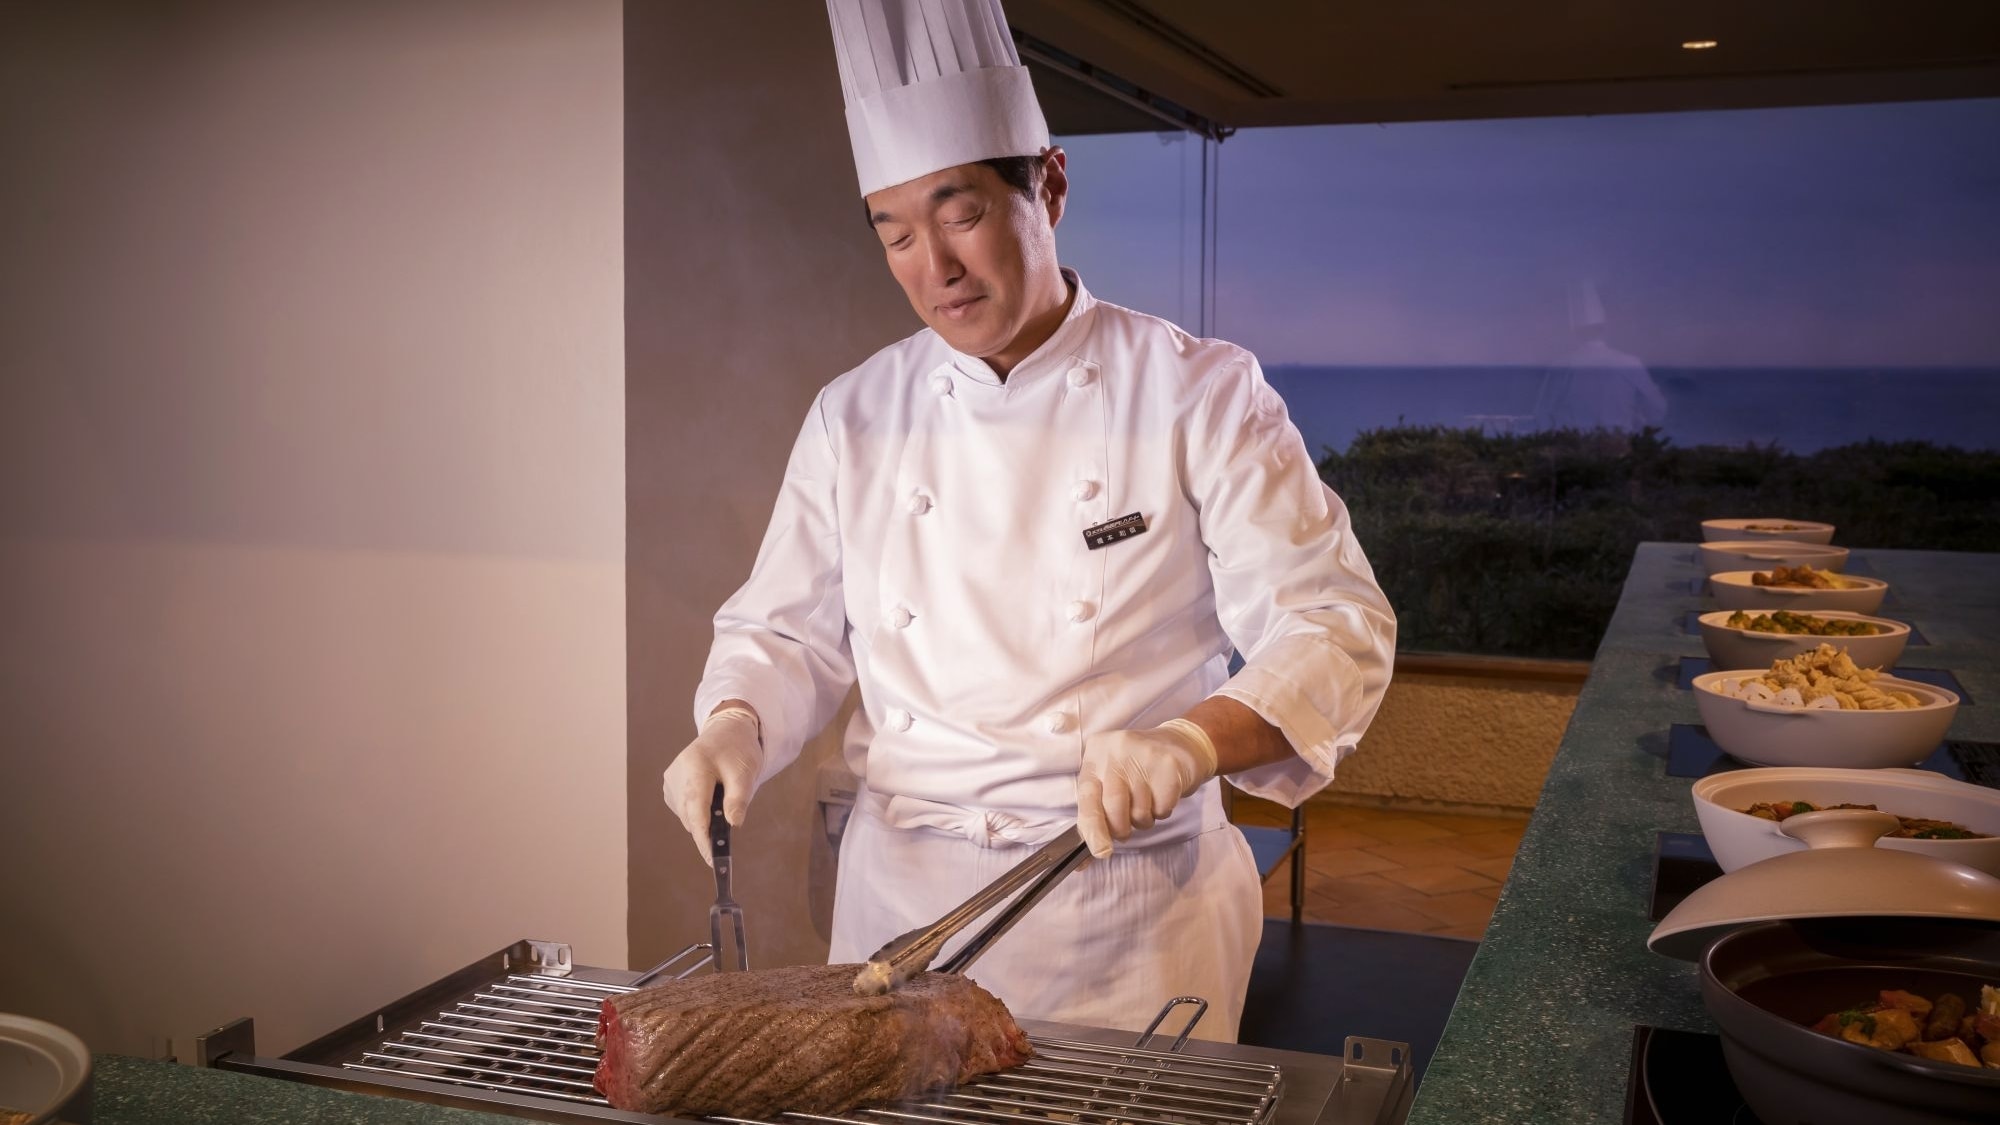 Special menu "Domestic beef roll grill" will be cooked in the live kitchen [dinner buffet]